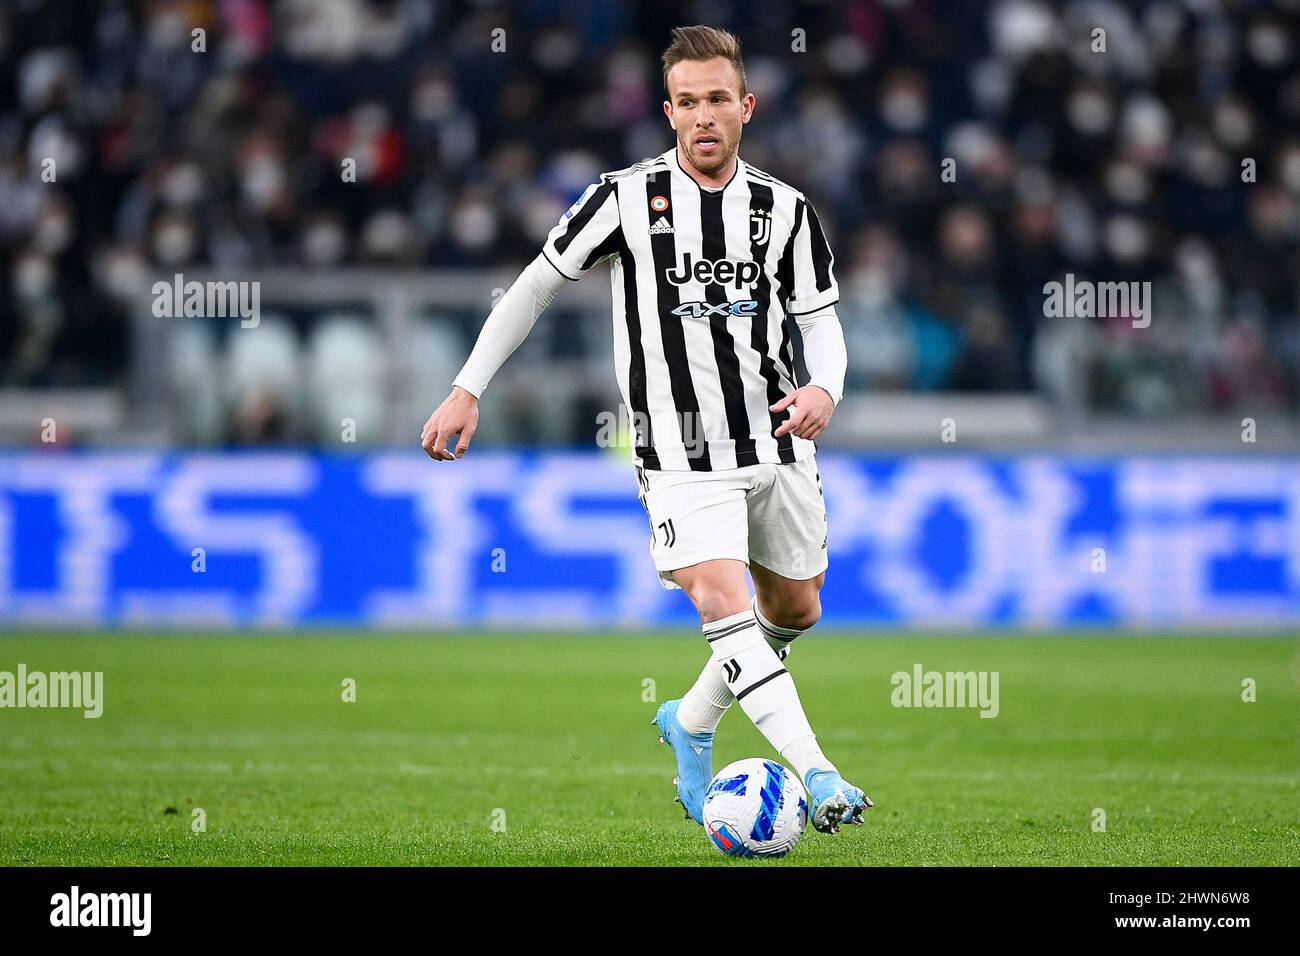 Turin, Italy. 06 March 2022. Arthur Melo of Juventus FC in acton during the Serie A football match between Juventus FC and Spezia Calcio. Credit: Nicolò Campo/Alamy Live News Stock Photo